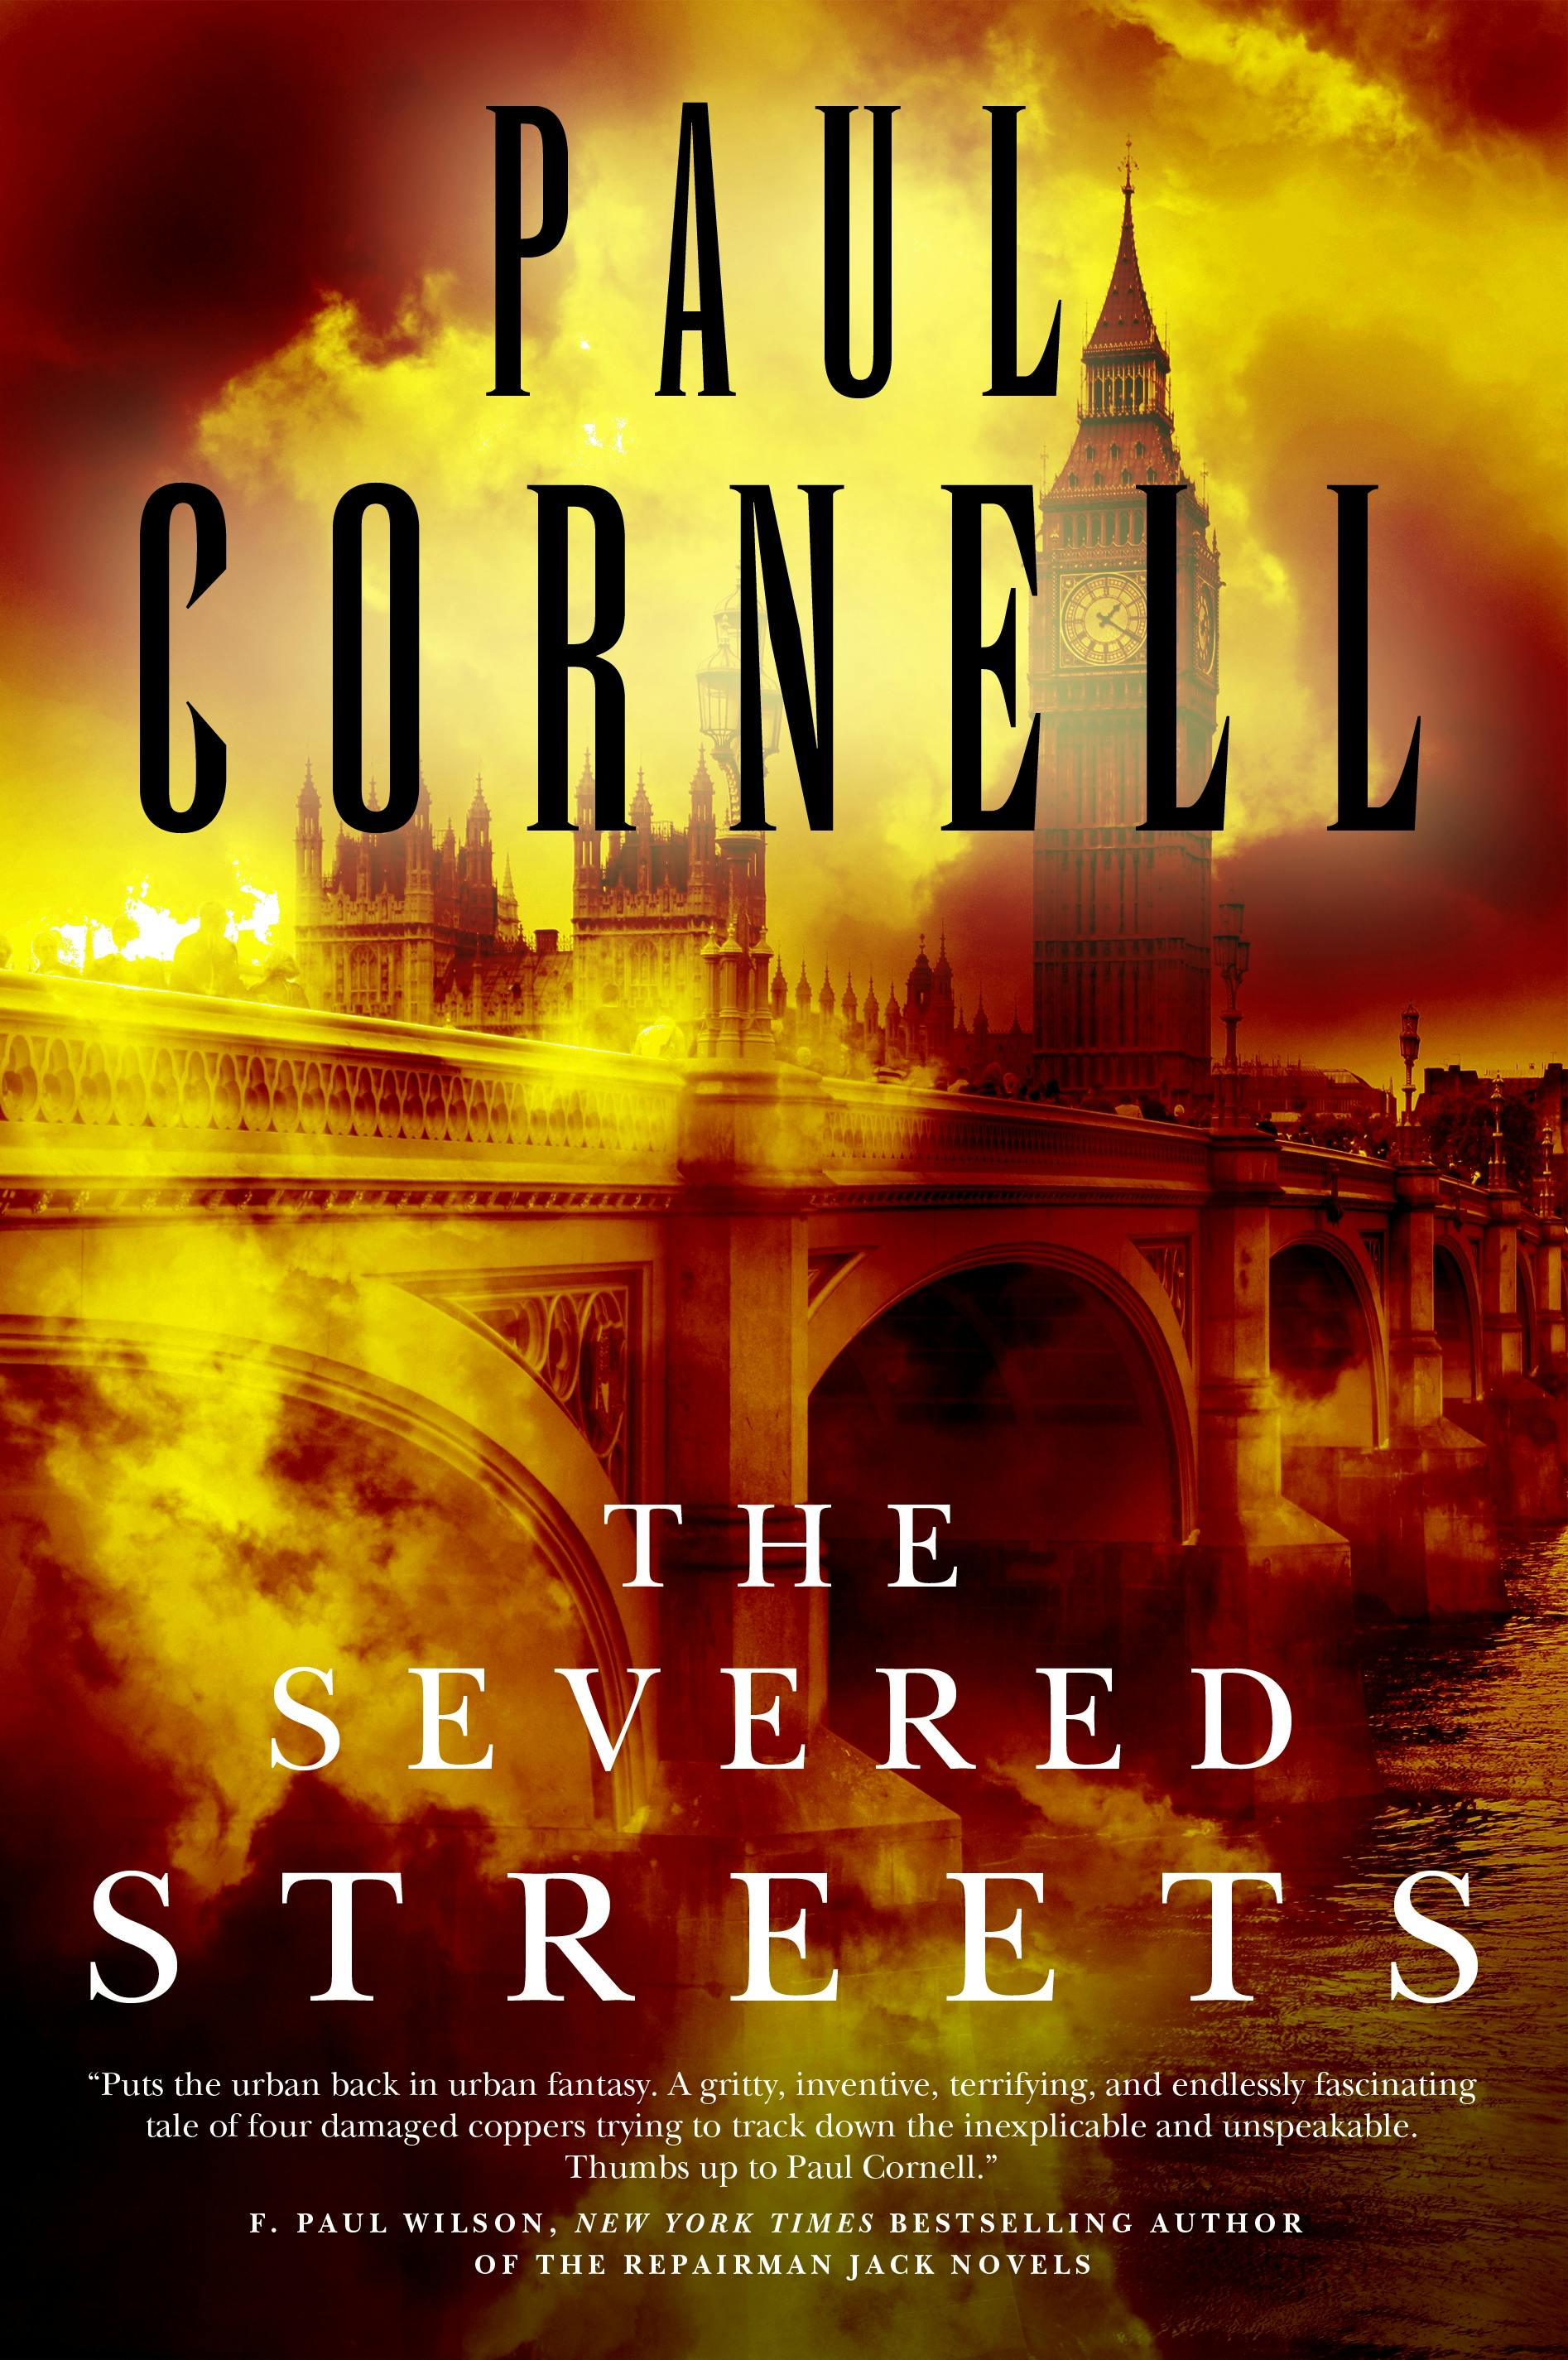 Image of The Severed Streets